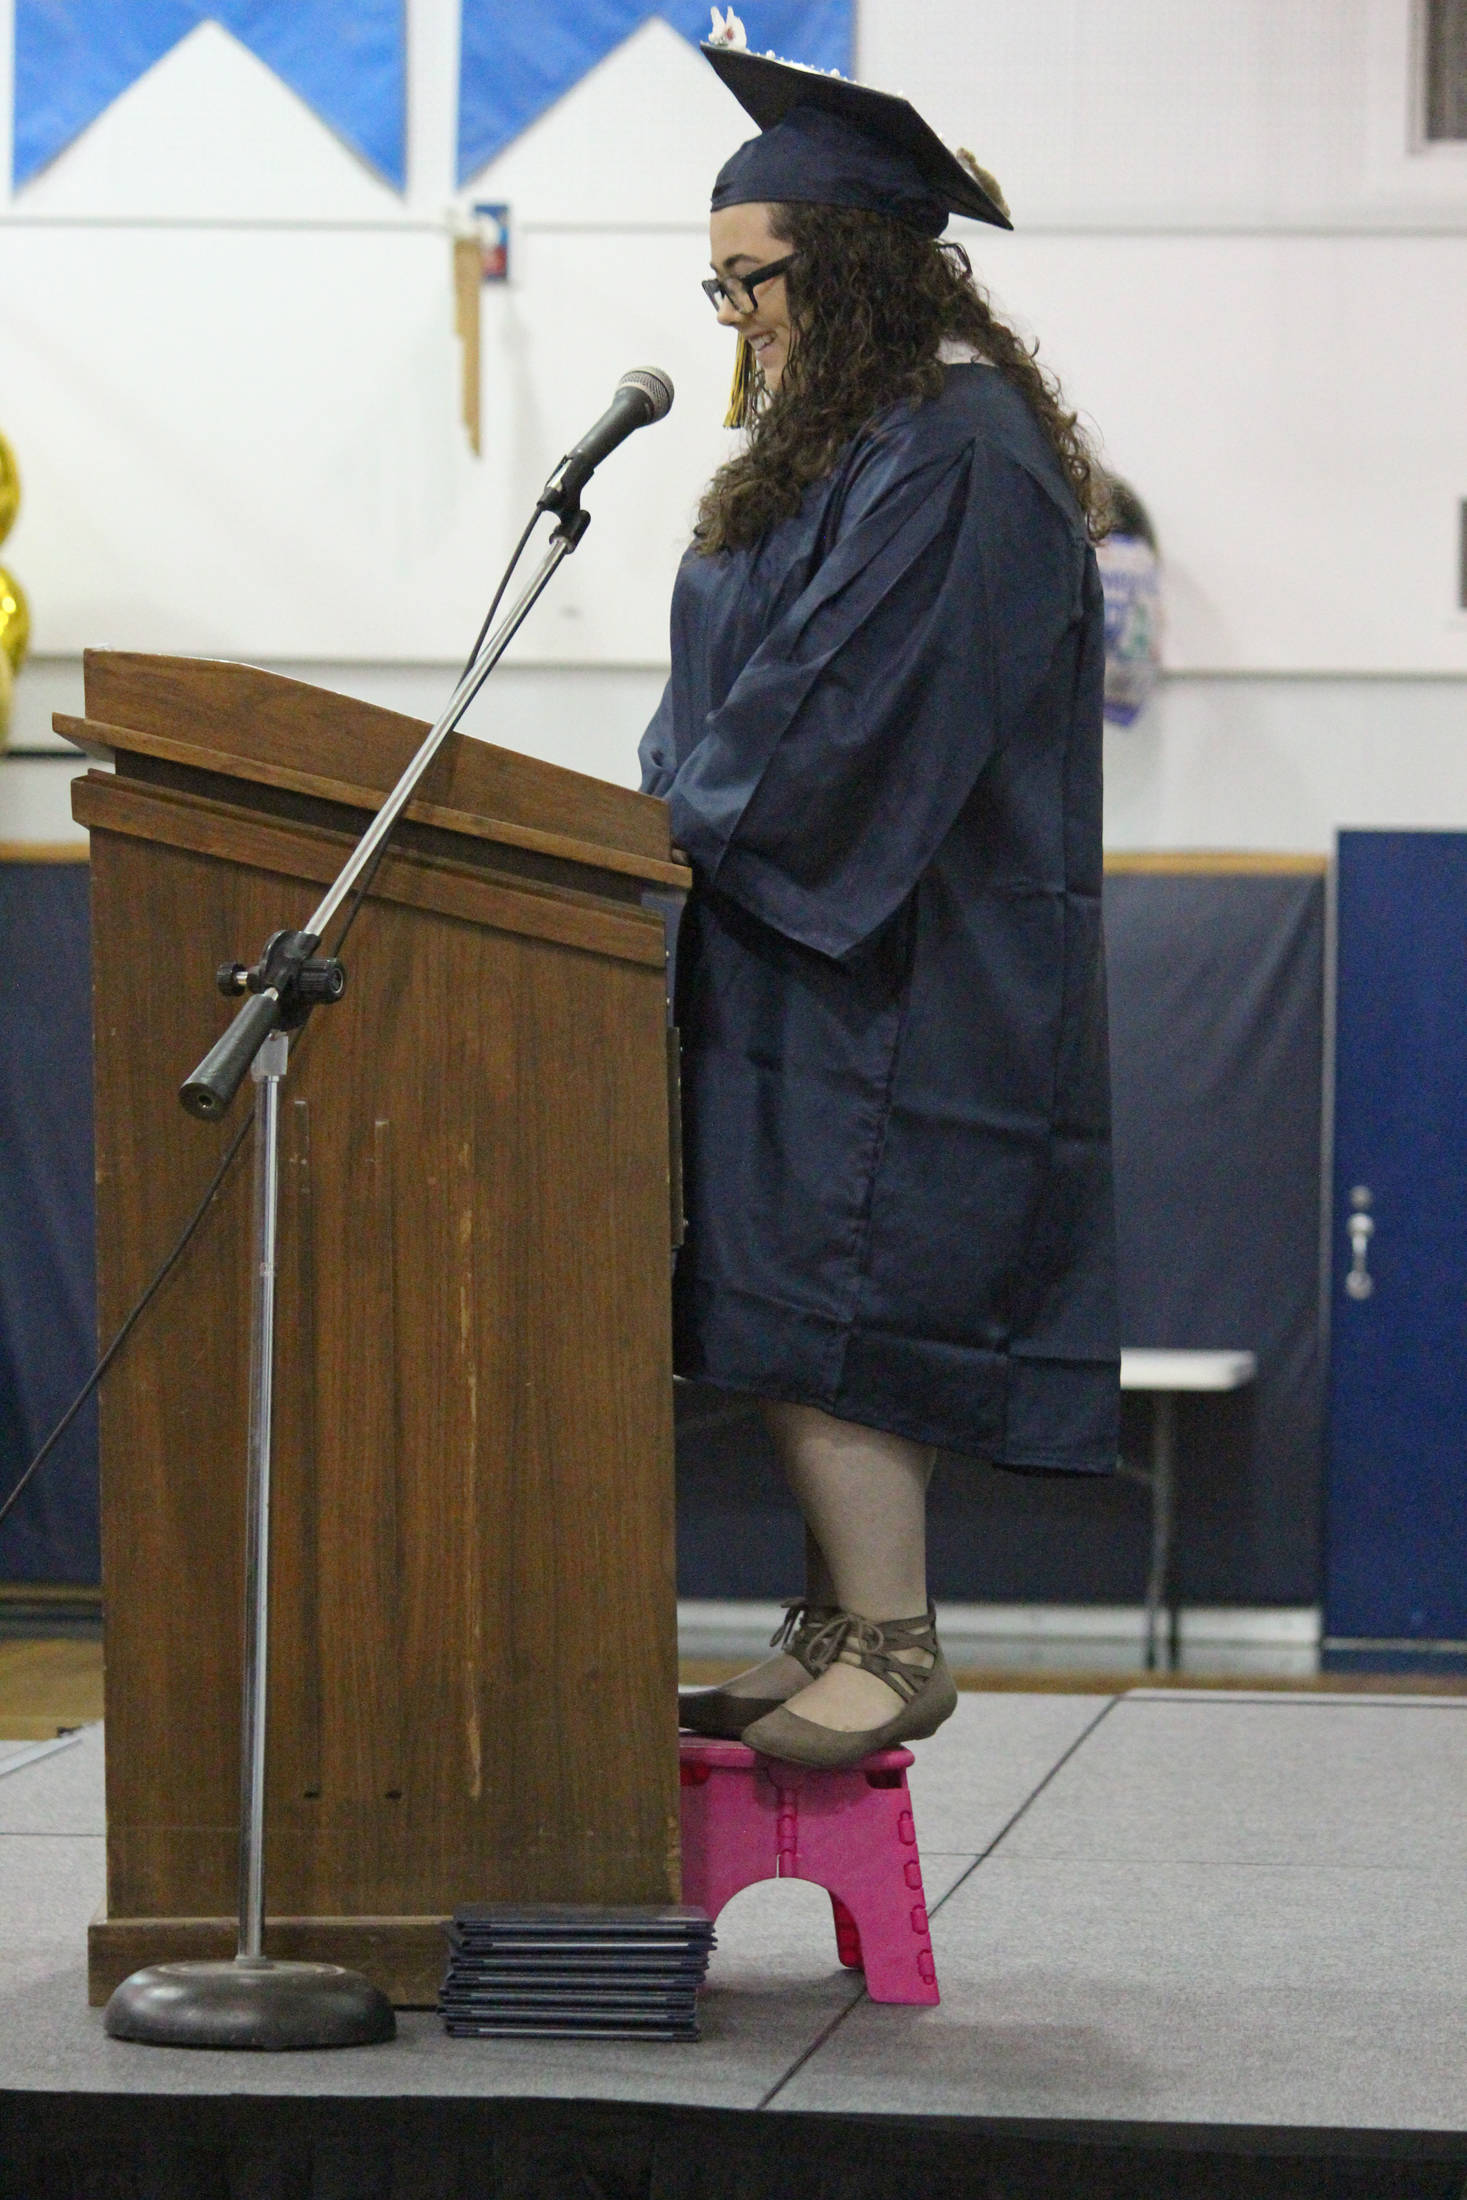 Ninilchik School salutatorian Chelsea Oberle-Lozano gives her salutatorian address during her class’s ceremony Monday, May 21, 2018 at the school in Ninilchik, Alaska. (Photo by Megan Pacer/Homer News)